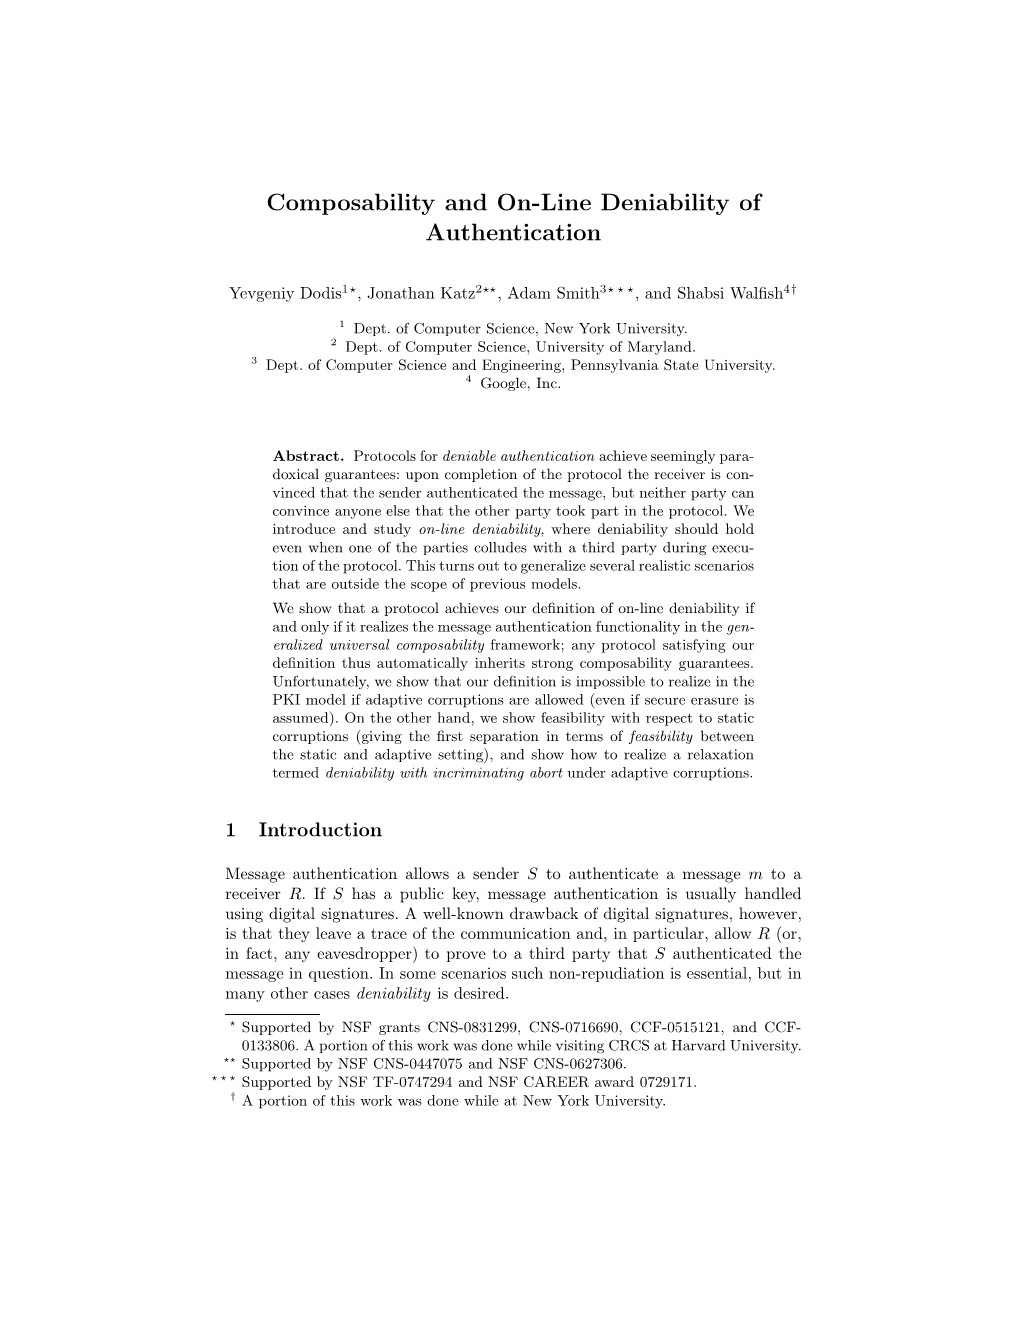 Composability and On-Line Deniability of Authentication